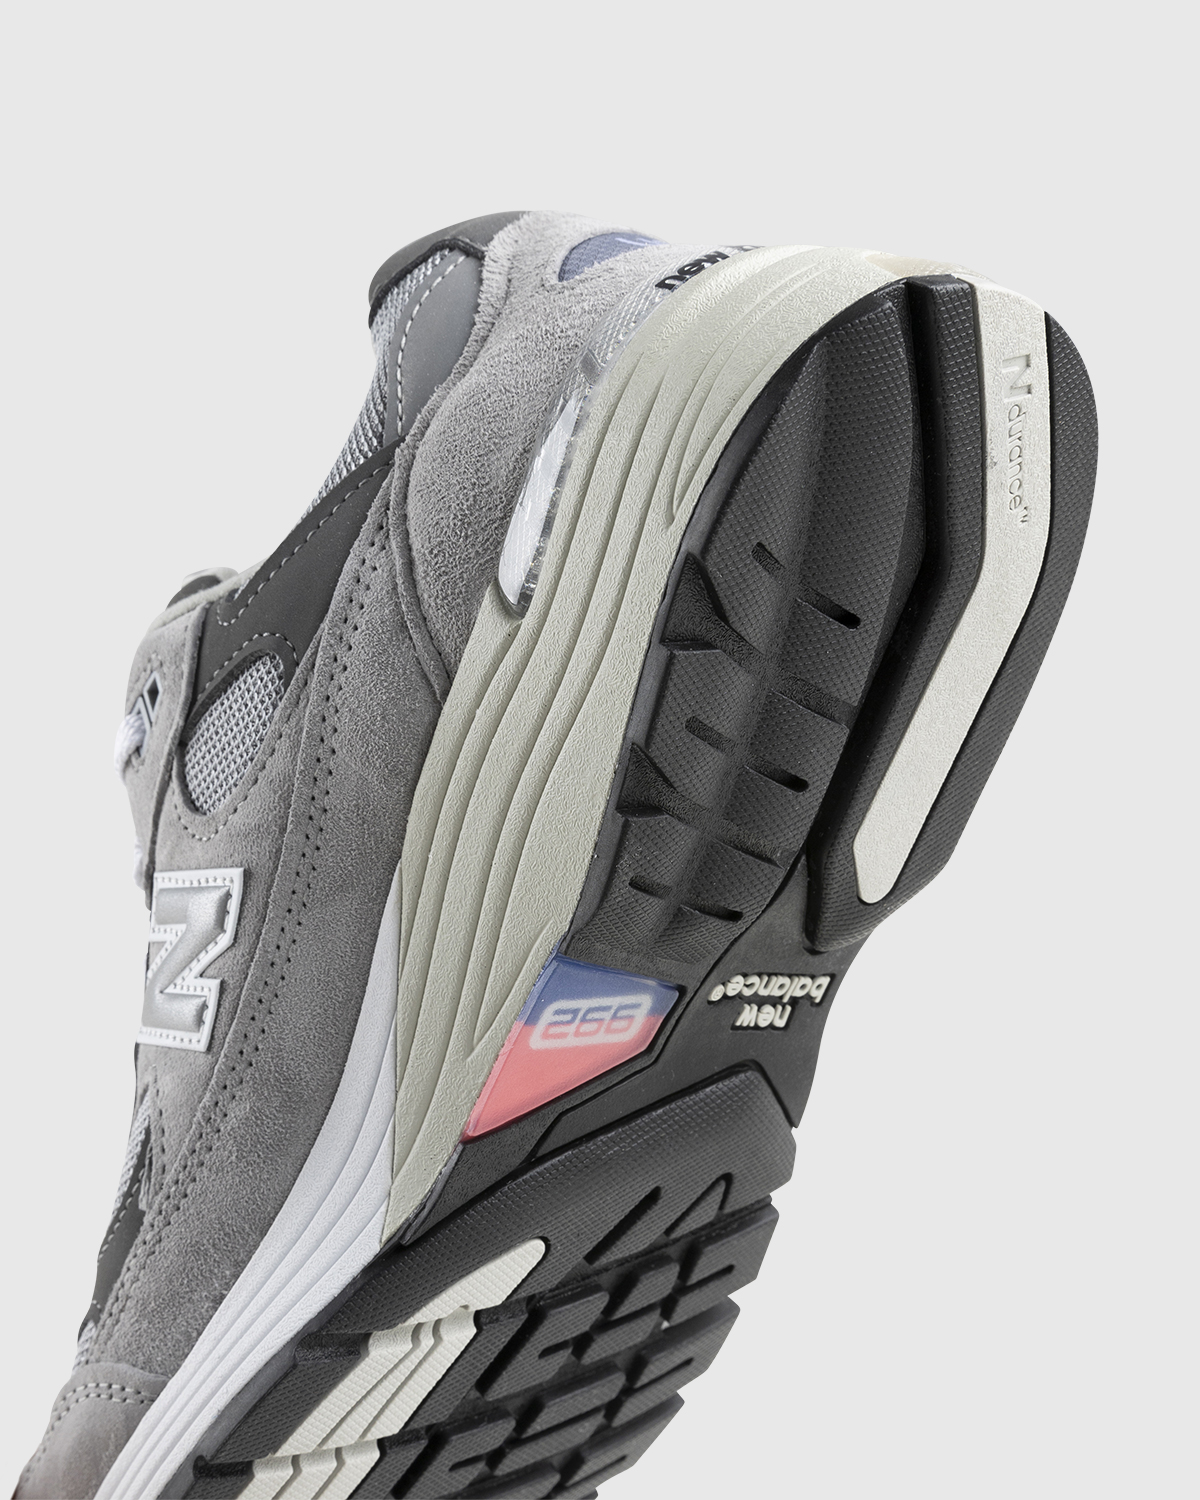 New Balance 992 Classic Gray: Official Images & Release Info